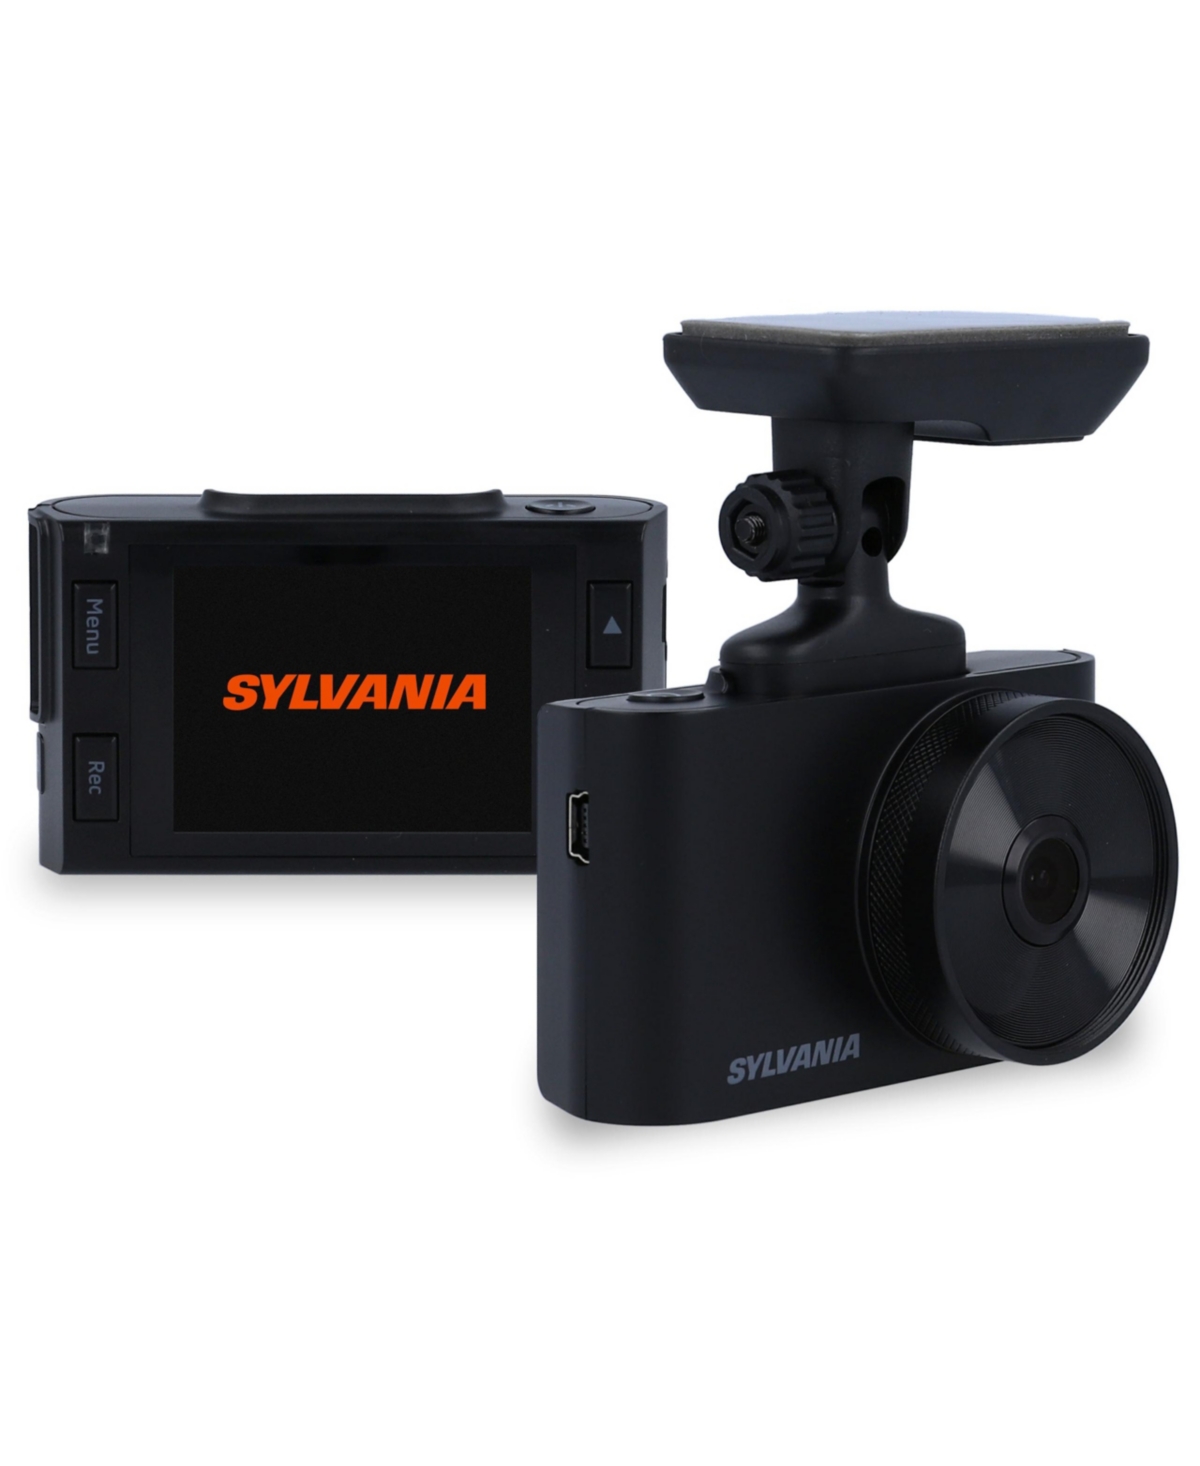 Sylvania Roadsight Basic Dash Camera - 110 Degree View, Hd 720p, 16GB Sd Memory Card Included, Loop Recording, GSensor, 2 inch Led Ips Screen, Parking Mode, Magnetic Mount, Taxi, Truck, Car